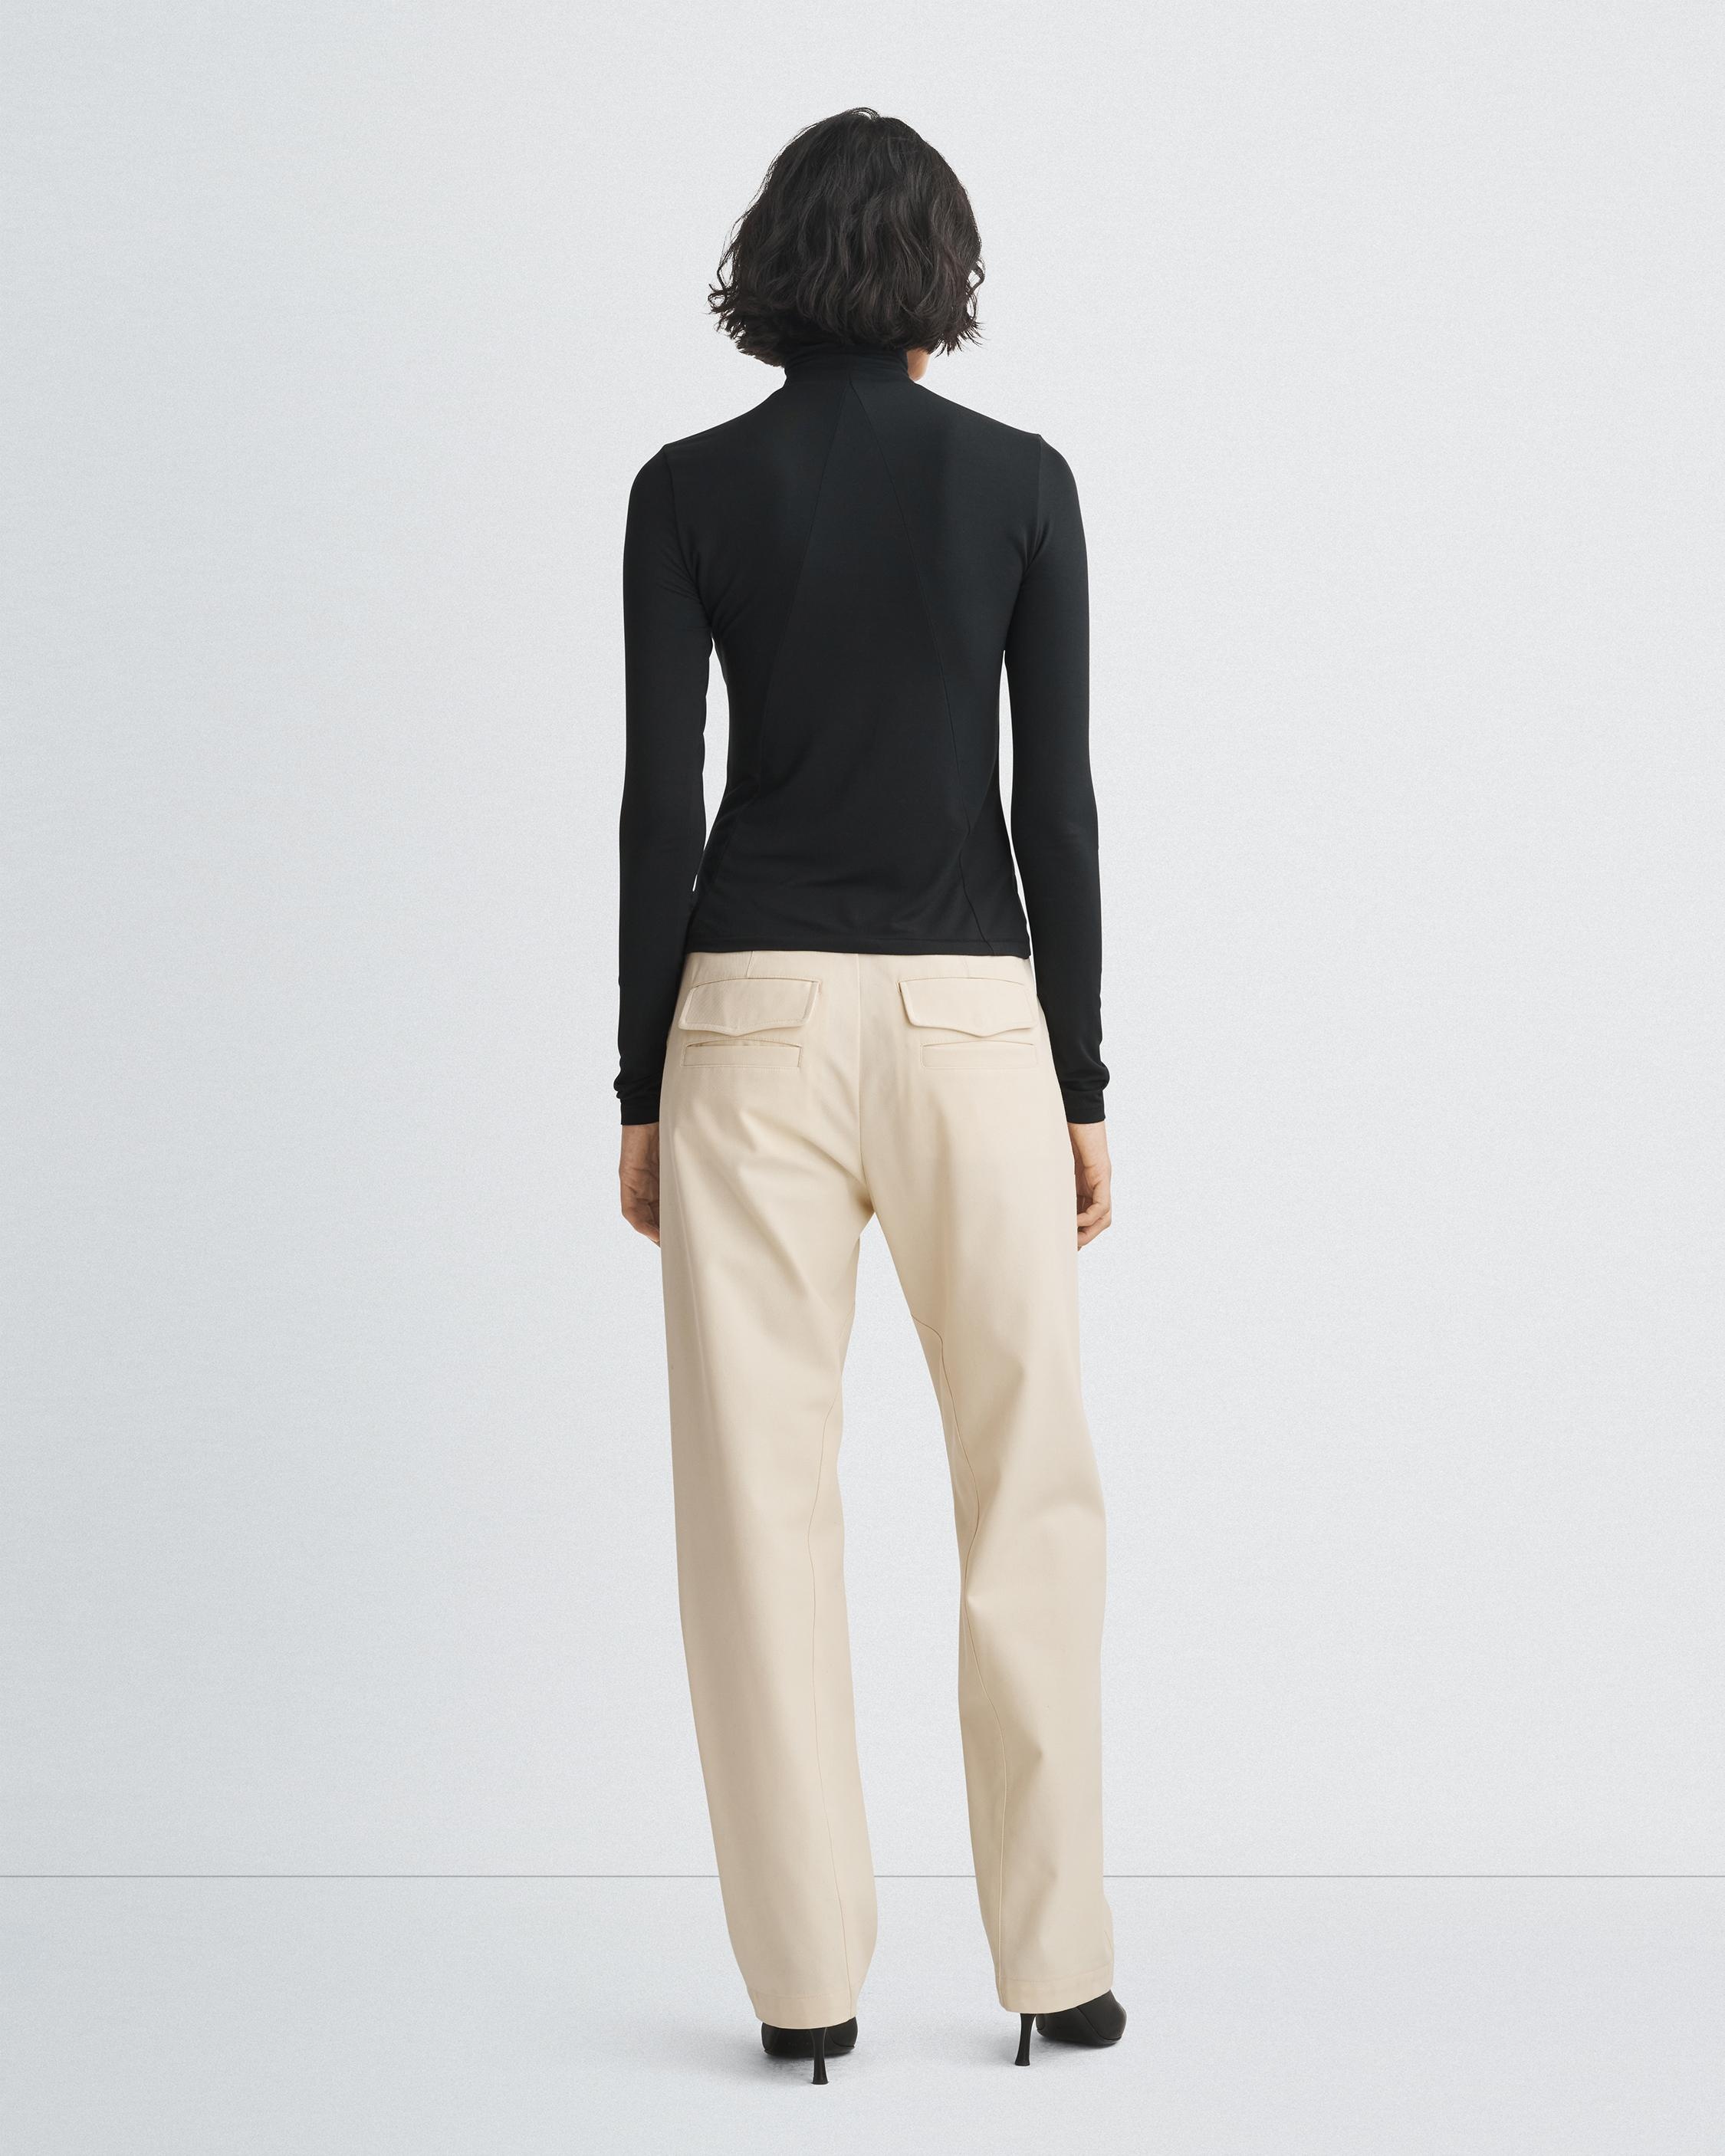 Malia Japanese Twill Cargo Pant
Relaxed Fit Pant - 5